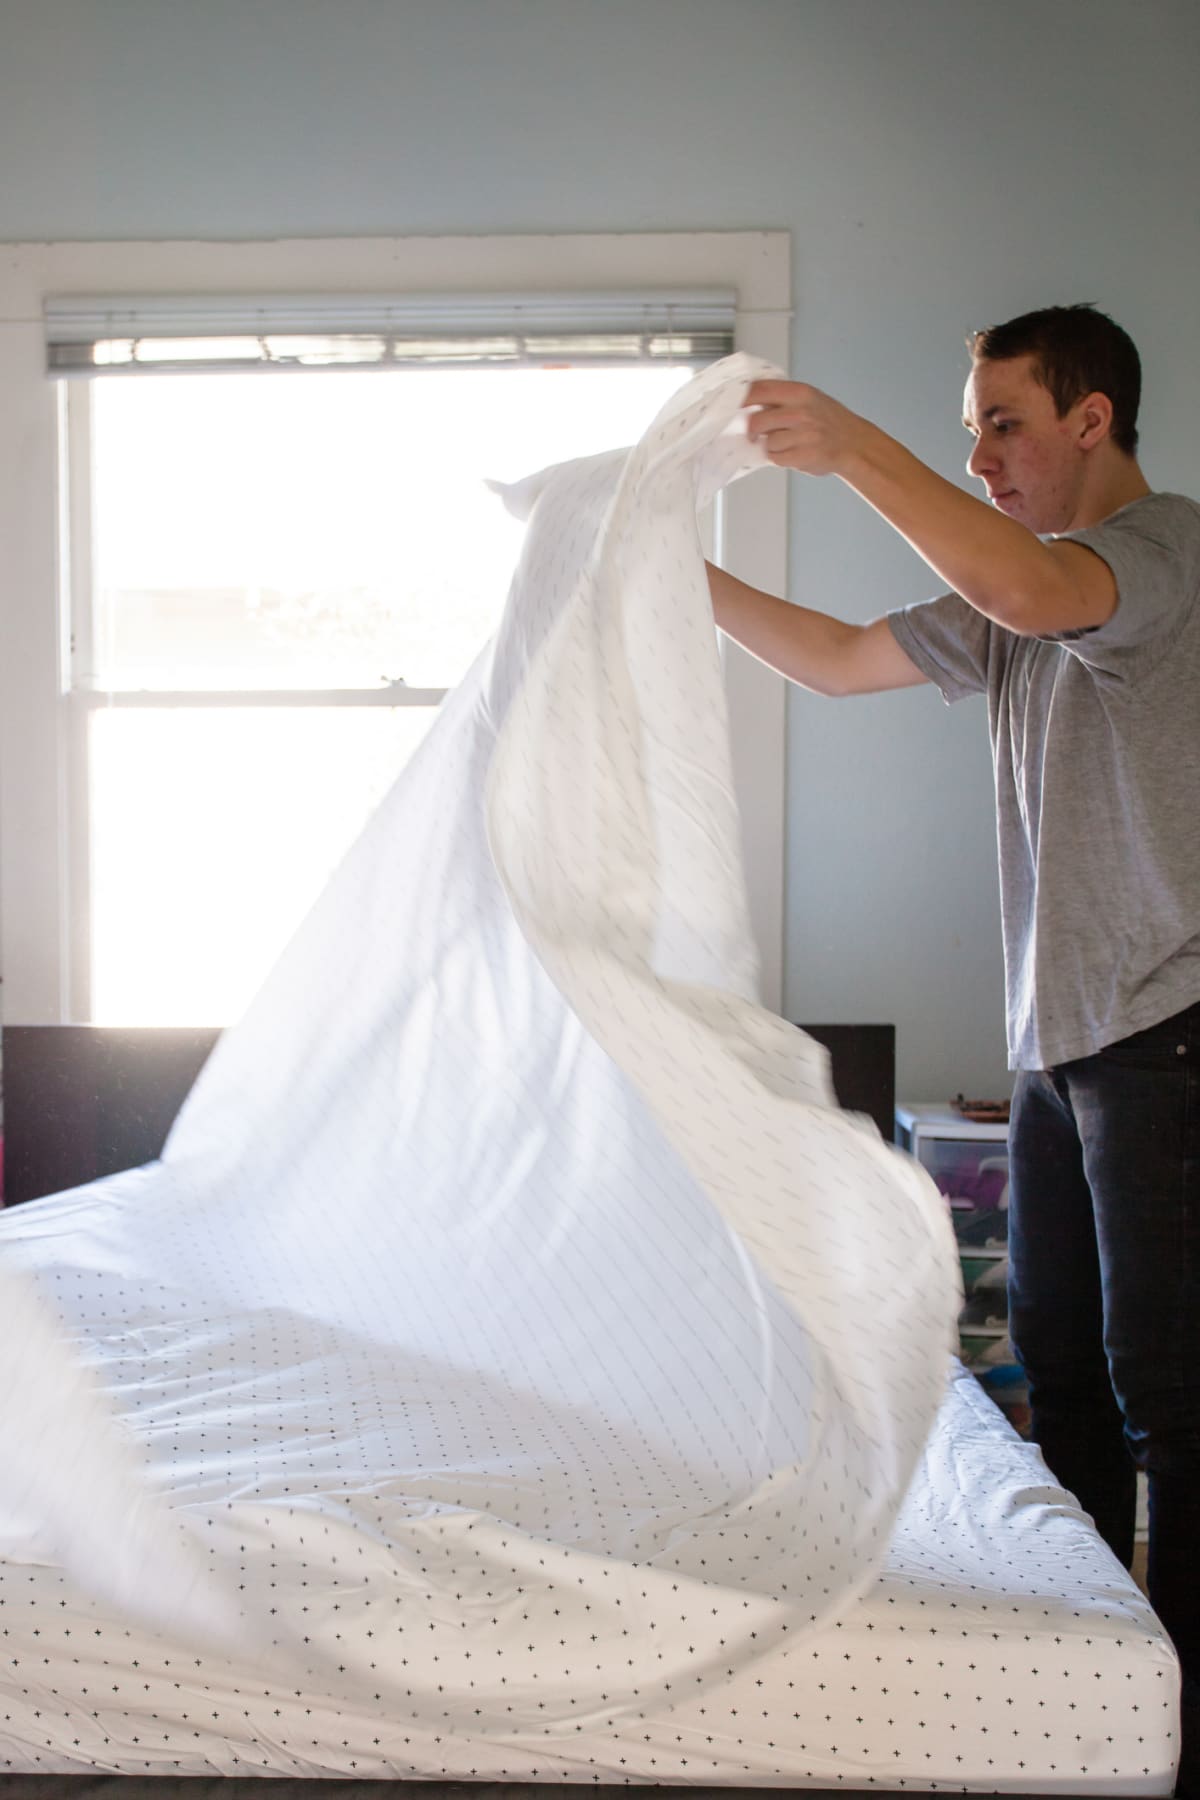 A man changing bedsheets